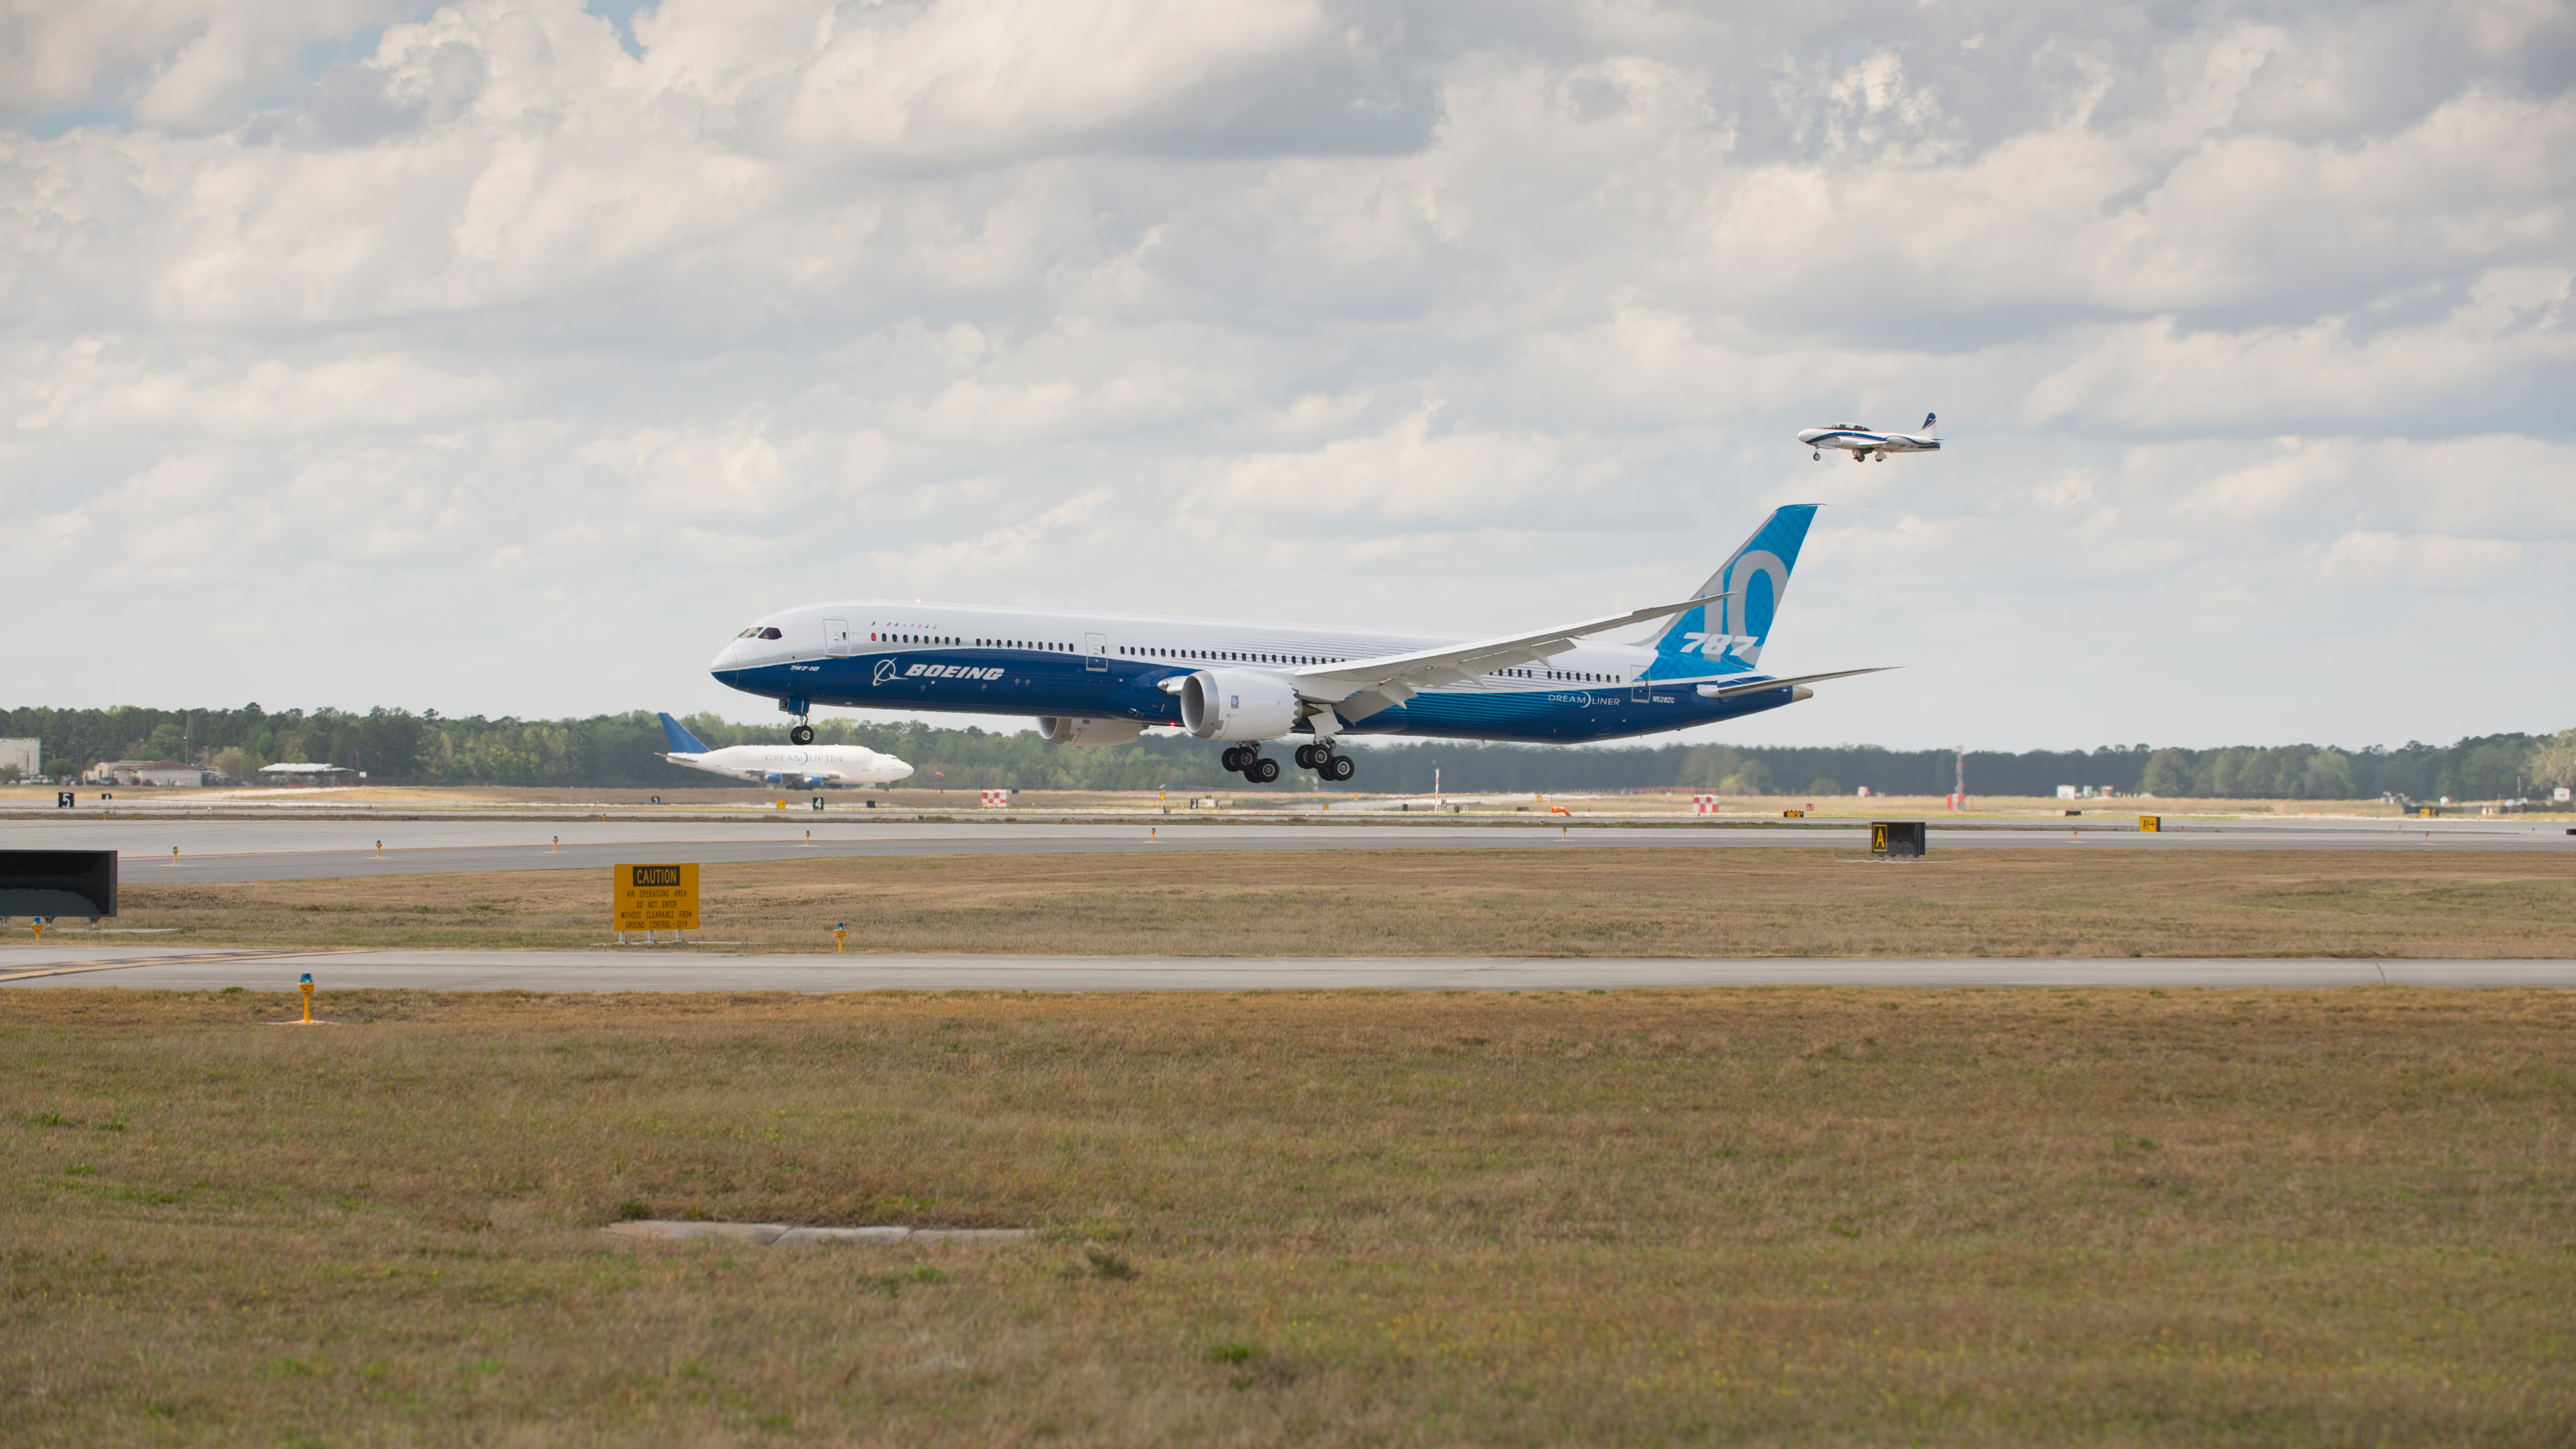 A Boeing 787-10 about to land on a runway.